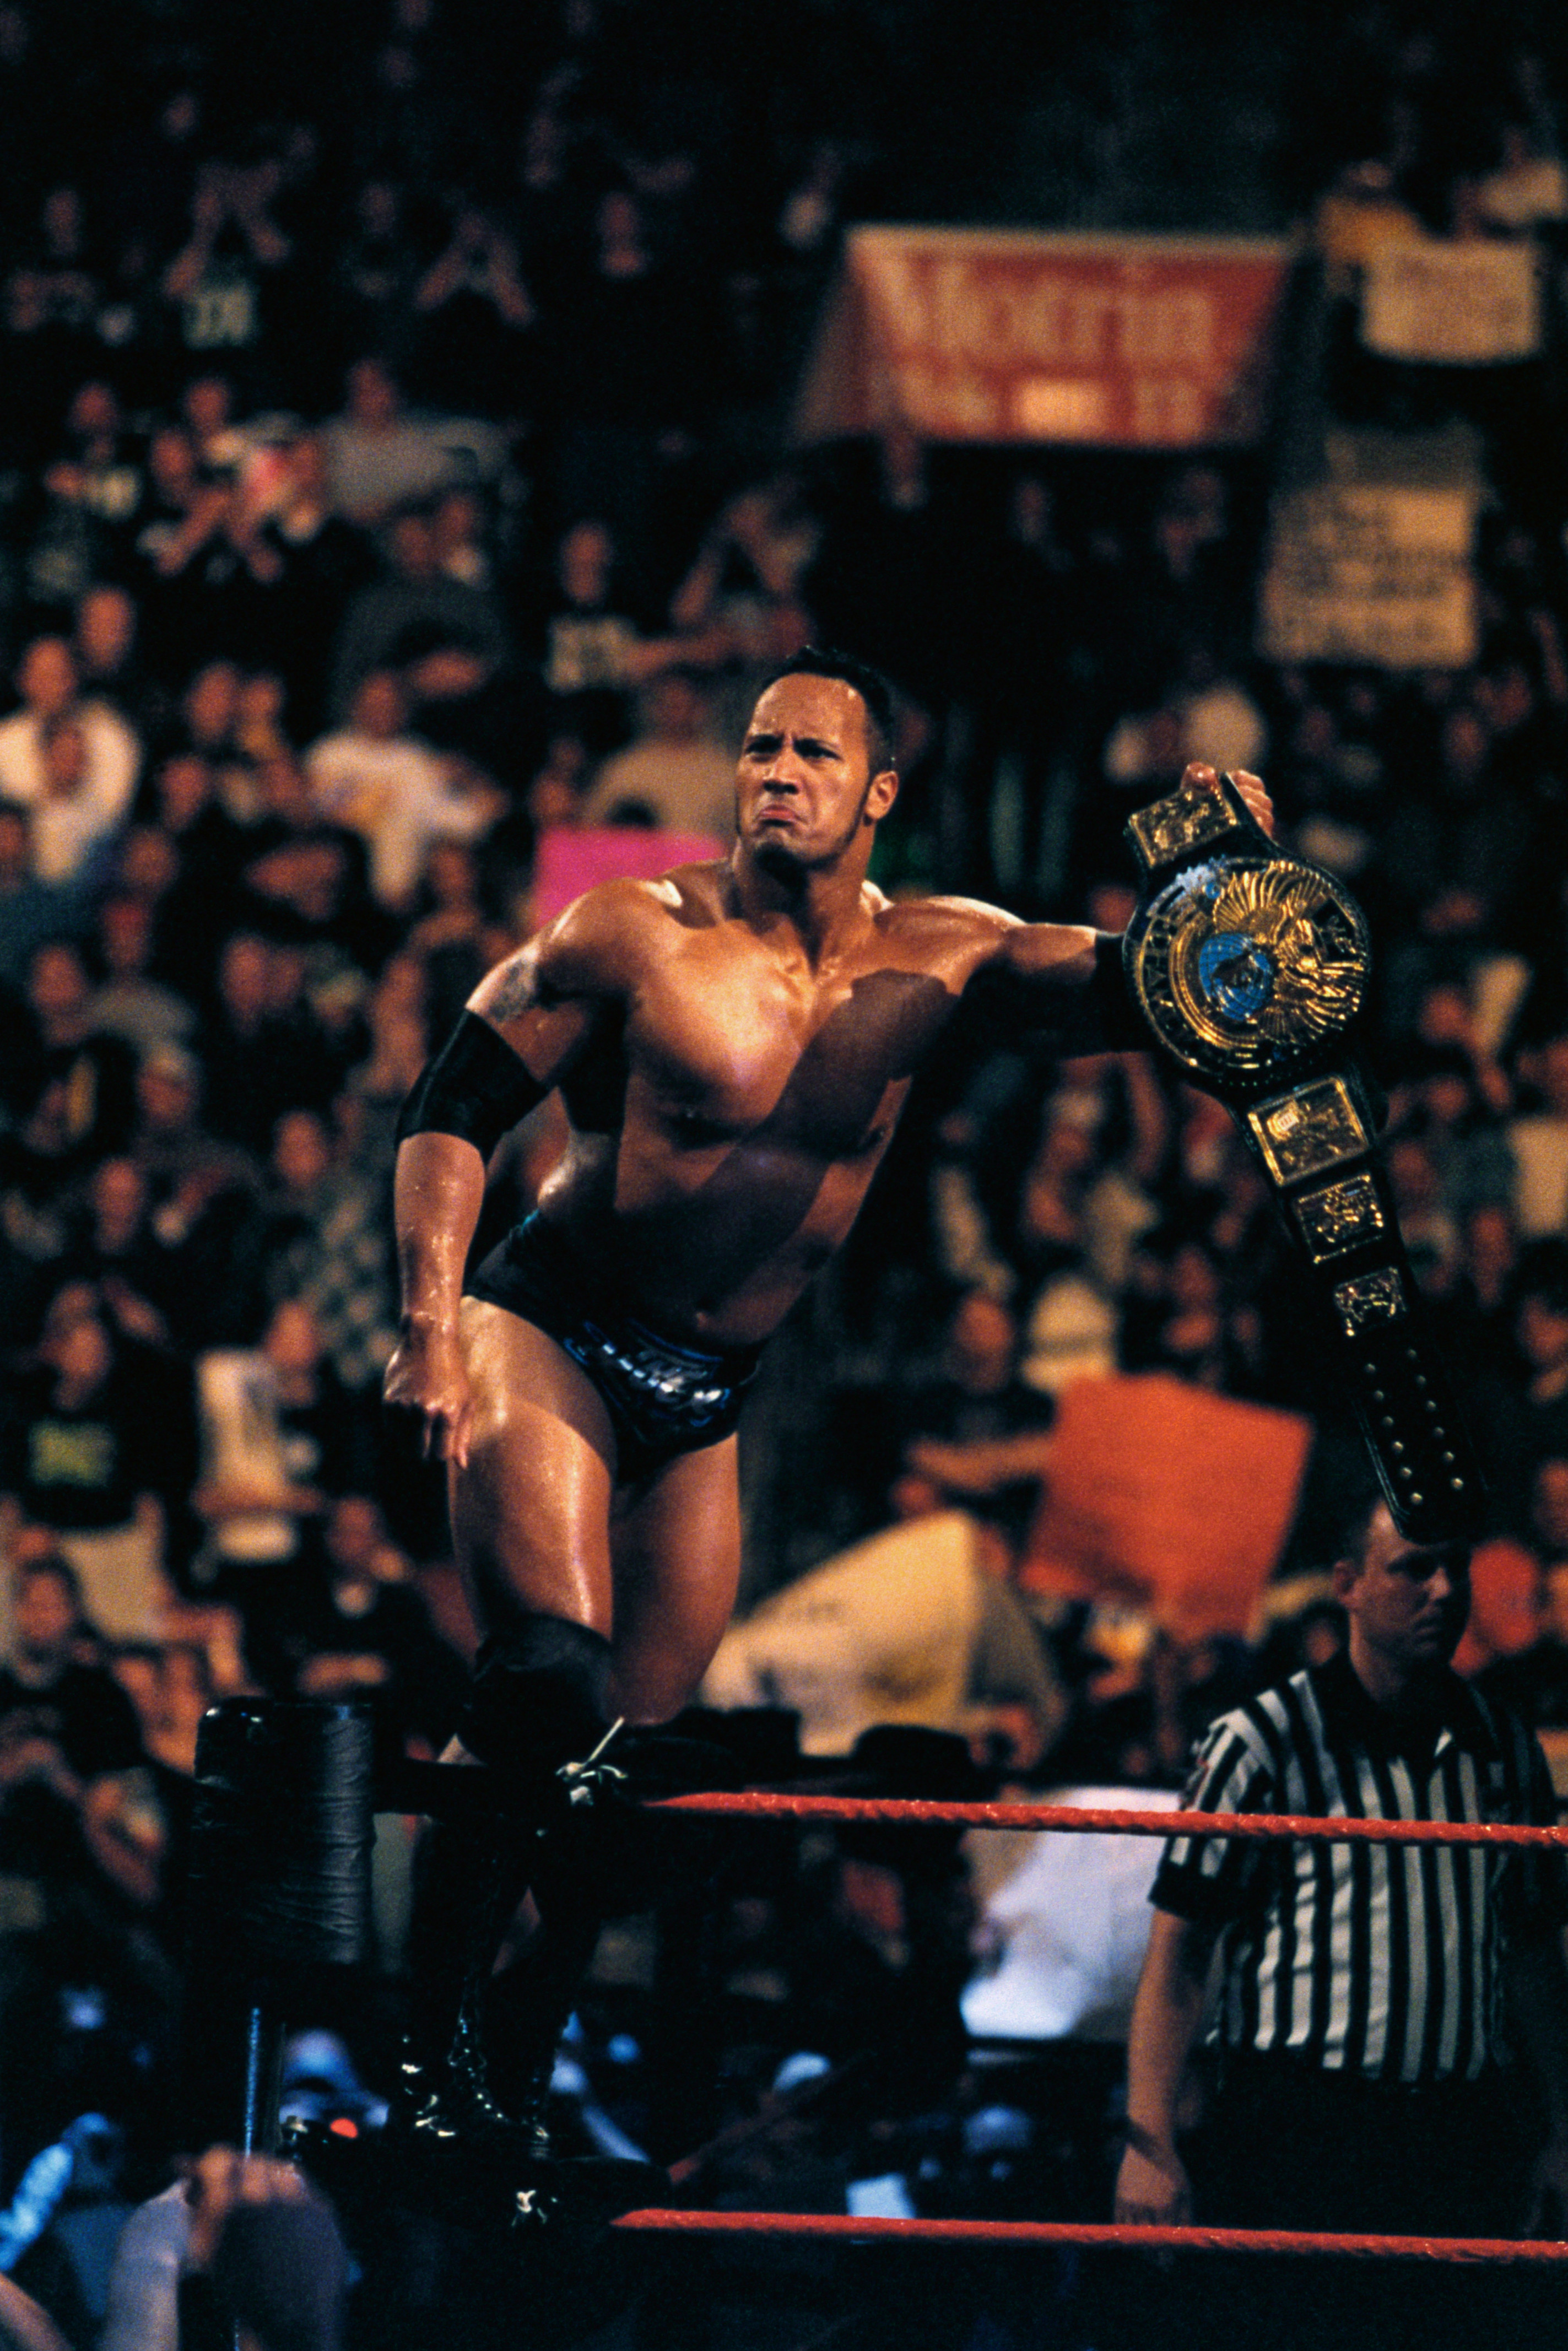 Although he's primarily an actor now, Dwayne Johnson started off his entertainment career as the professional wrestler known as The Rock. Above, he is seen holding his championship belt during the World Wrestling Federation's Wrestlemania XV at First Union Center in Philadelphia, PA, March 28, 1999.